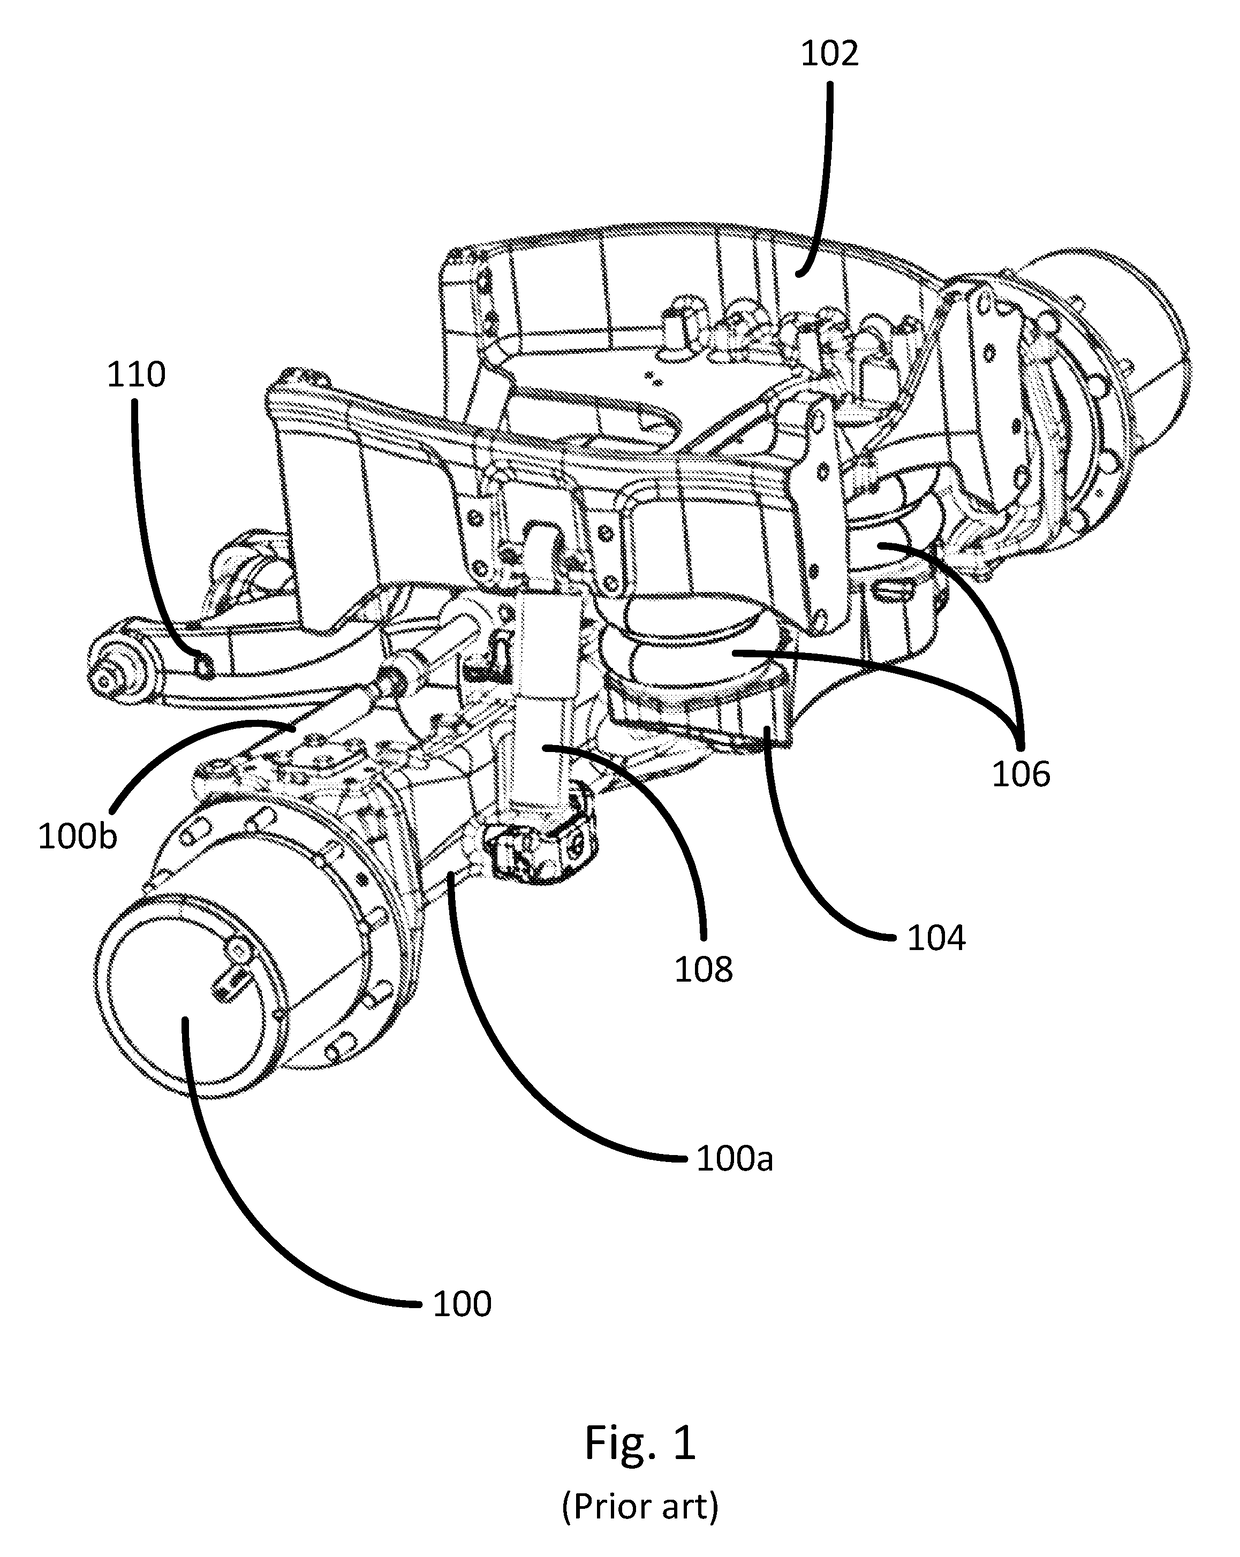 Axle suspension system for a tractor